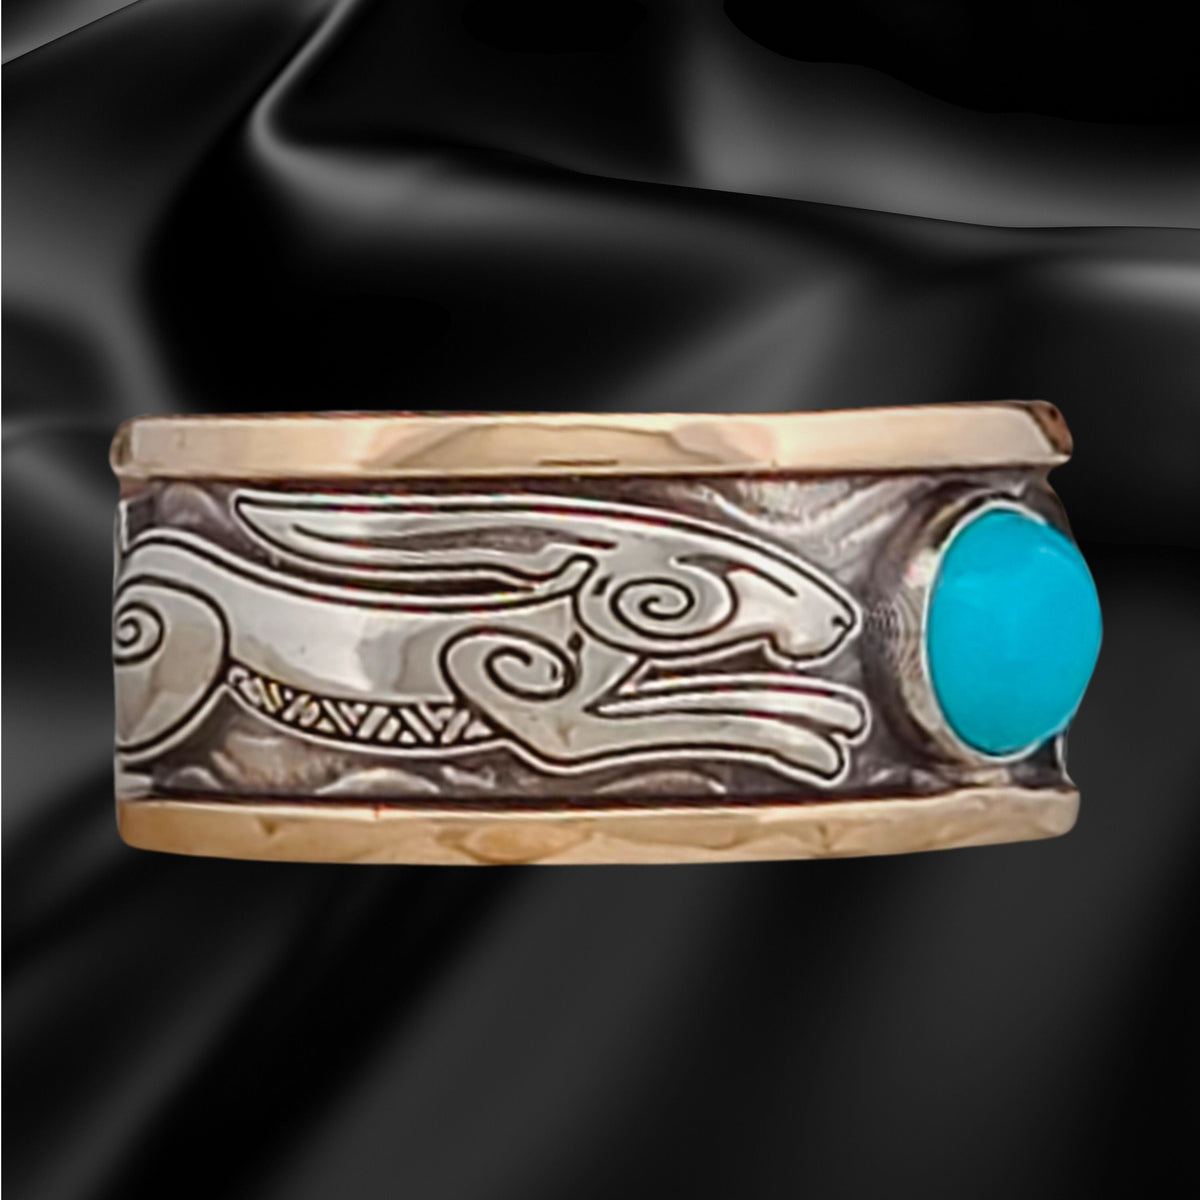 FREYJA&#39;S HARES SOLITAIRE BAND RING with TURQUOISE CABACHON 10KT 2-TONE GOLD